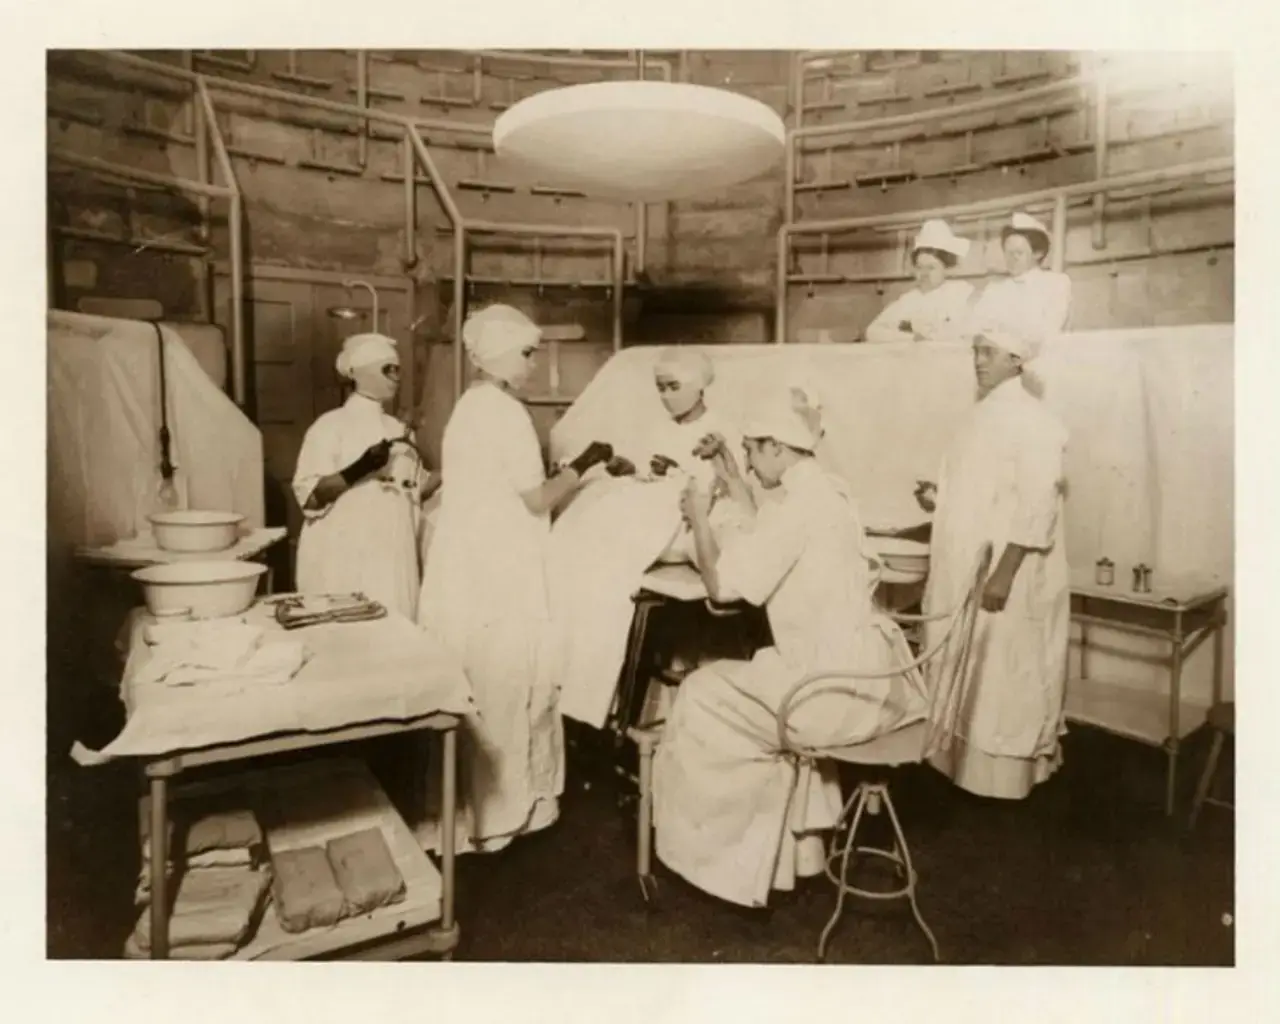 Carrie Pearson; Elizabeth Rae; Dr. Ella M. Russell; Dr. Stewart; Dr. Dunlap; Dr. Potter; Smith, R.N. Surgery amphitheater at the building on North College Avenue, January 1911. Image courtesy of the Drexel University College of Medicine Legacy Center&#39;s Archives and Special Collections.